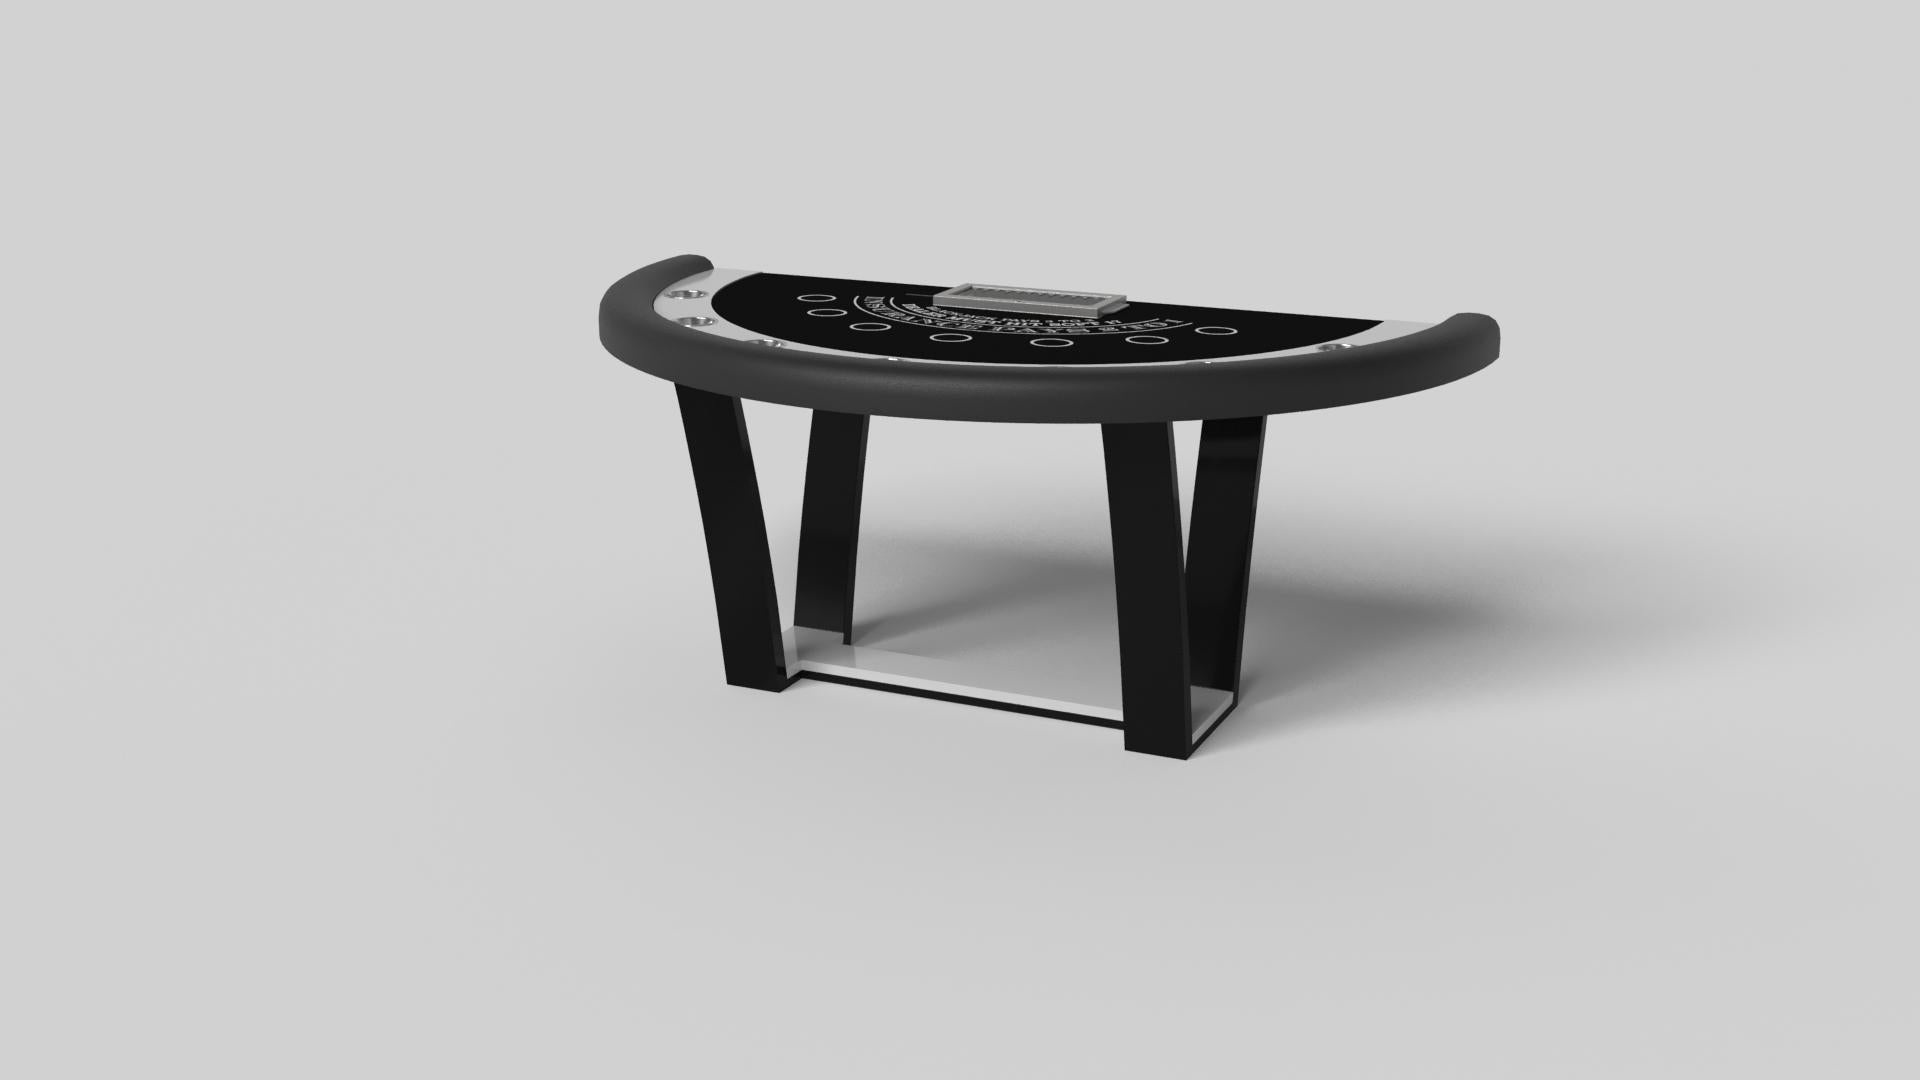 With an I-shaped metal base, slightly sloped metal legs, and a contrasting wood top, the Elite blackjack table exudes modern sophistication while evoking a sense of art deco design. This table is a confluence of style, made to meet today's demands